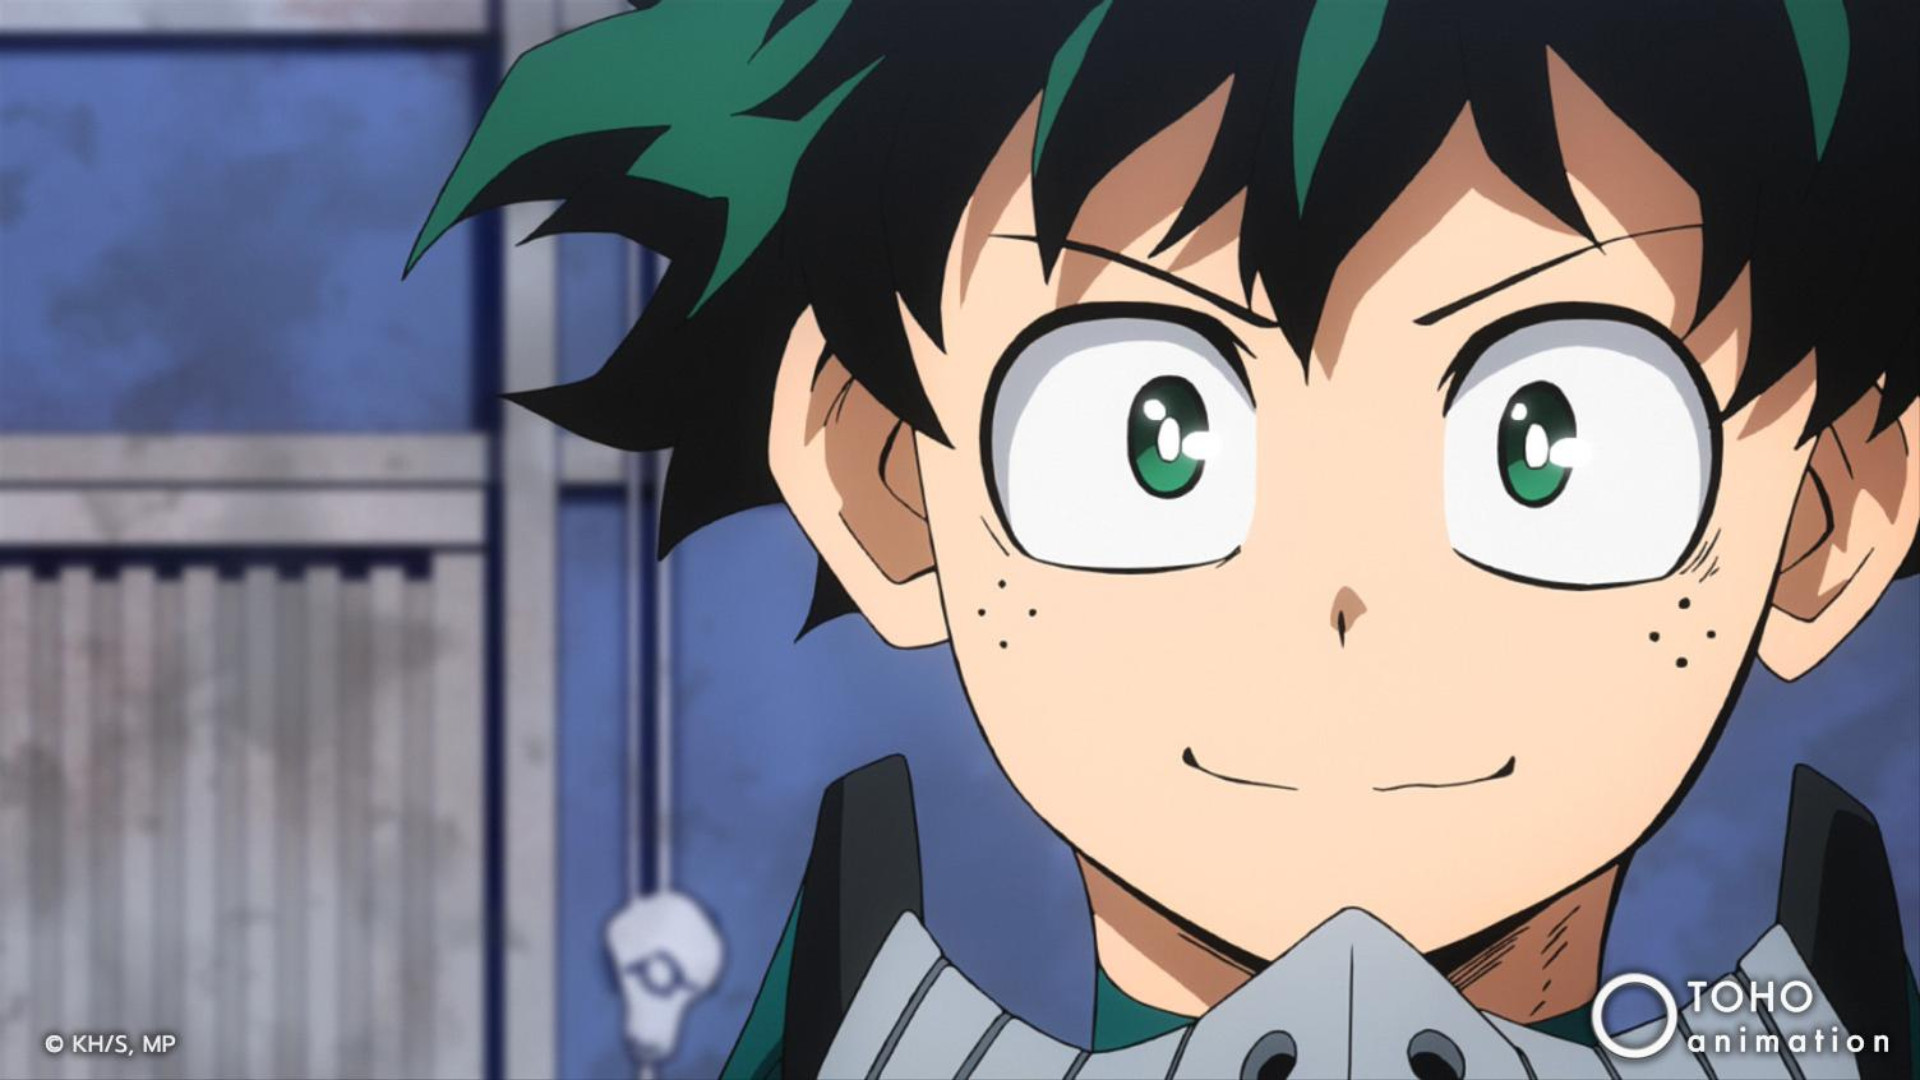 My Hero Academia Live Action Movie Lands Director After Three Years In Development